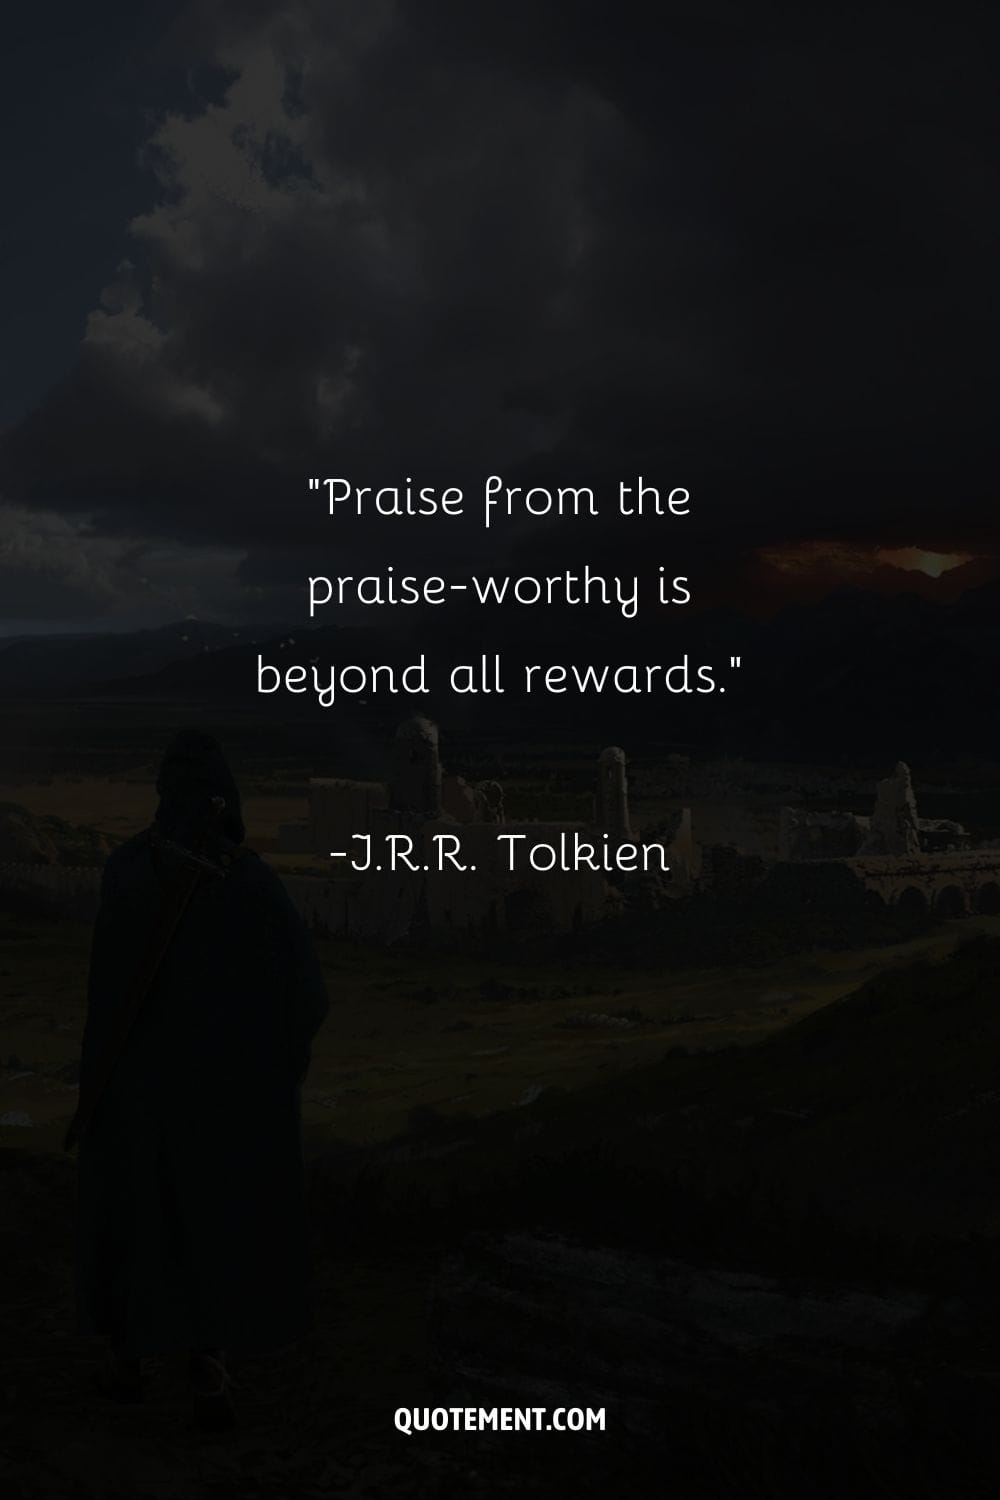 Praise from the praise-worthy is beyond all rewards.